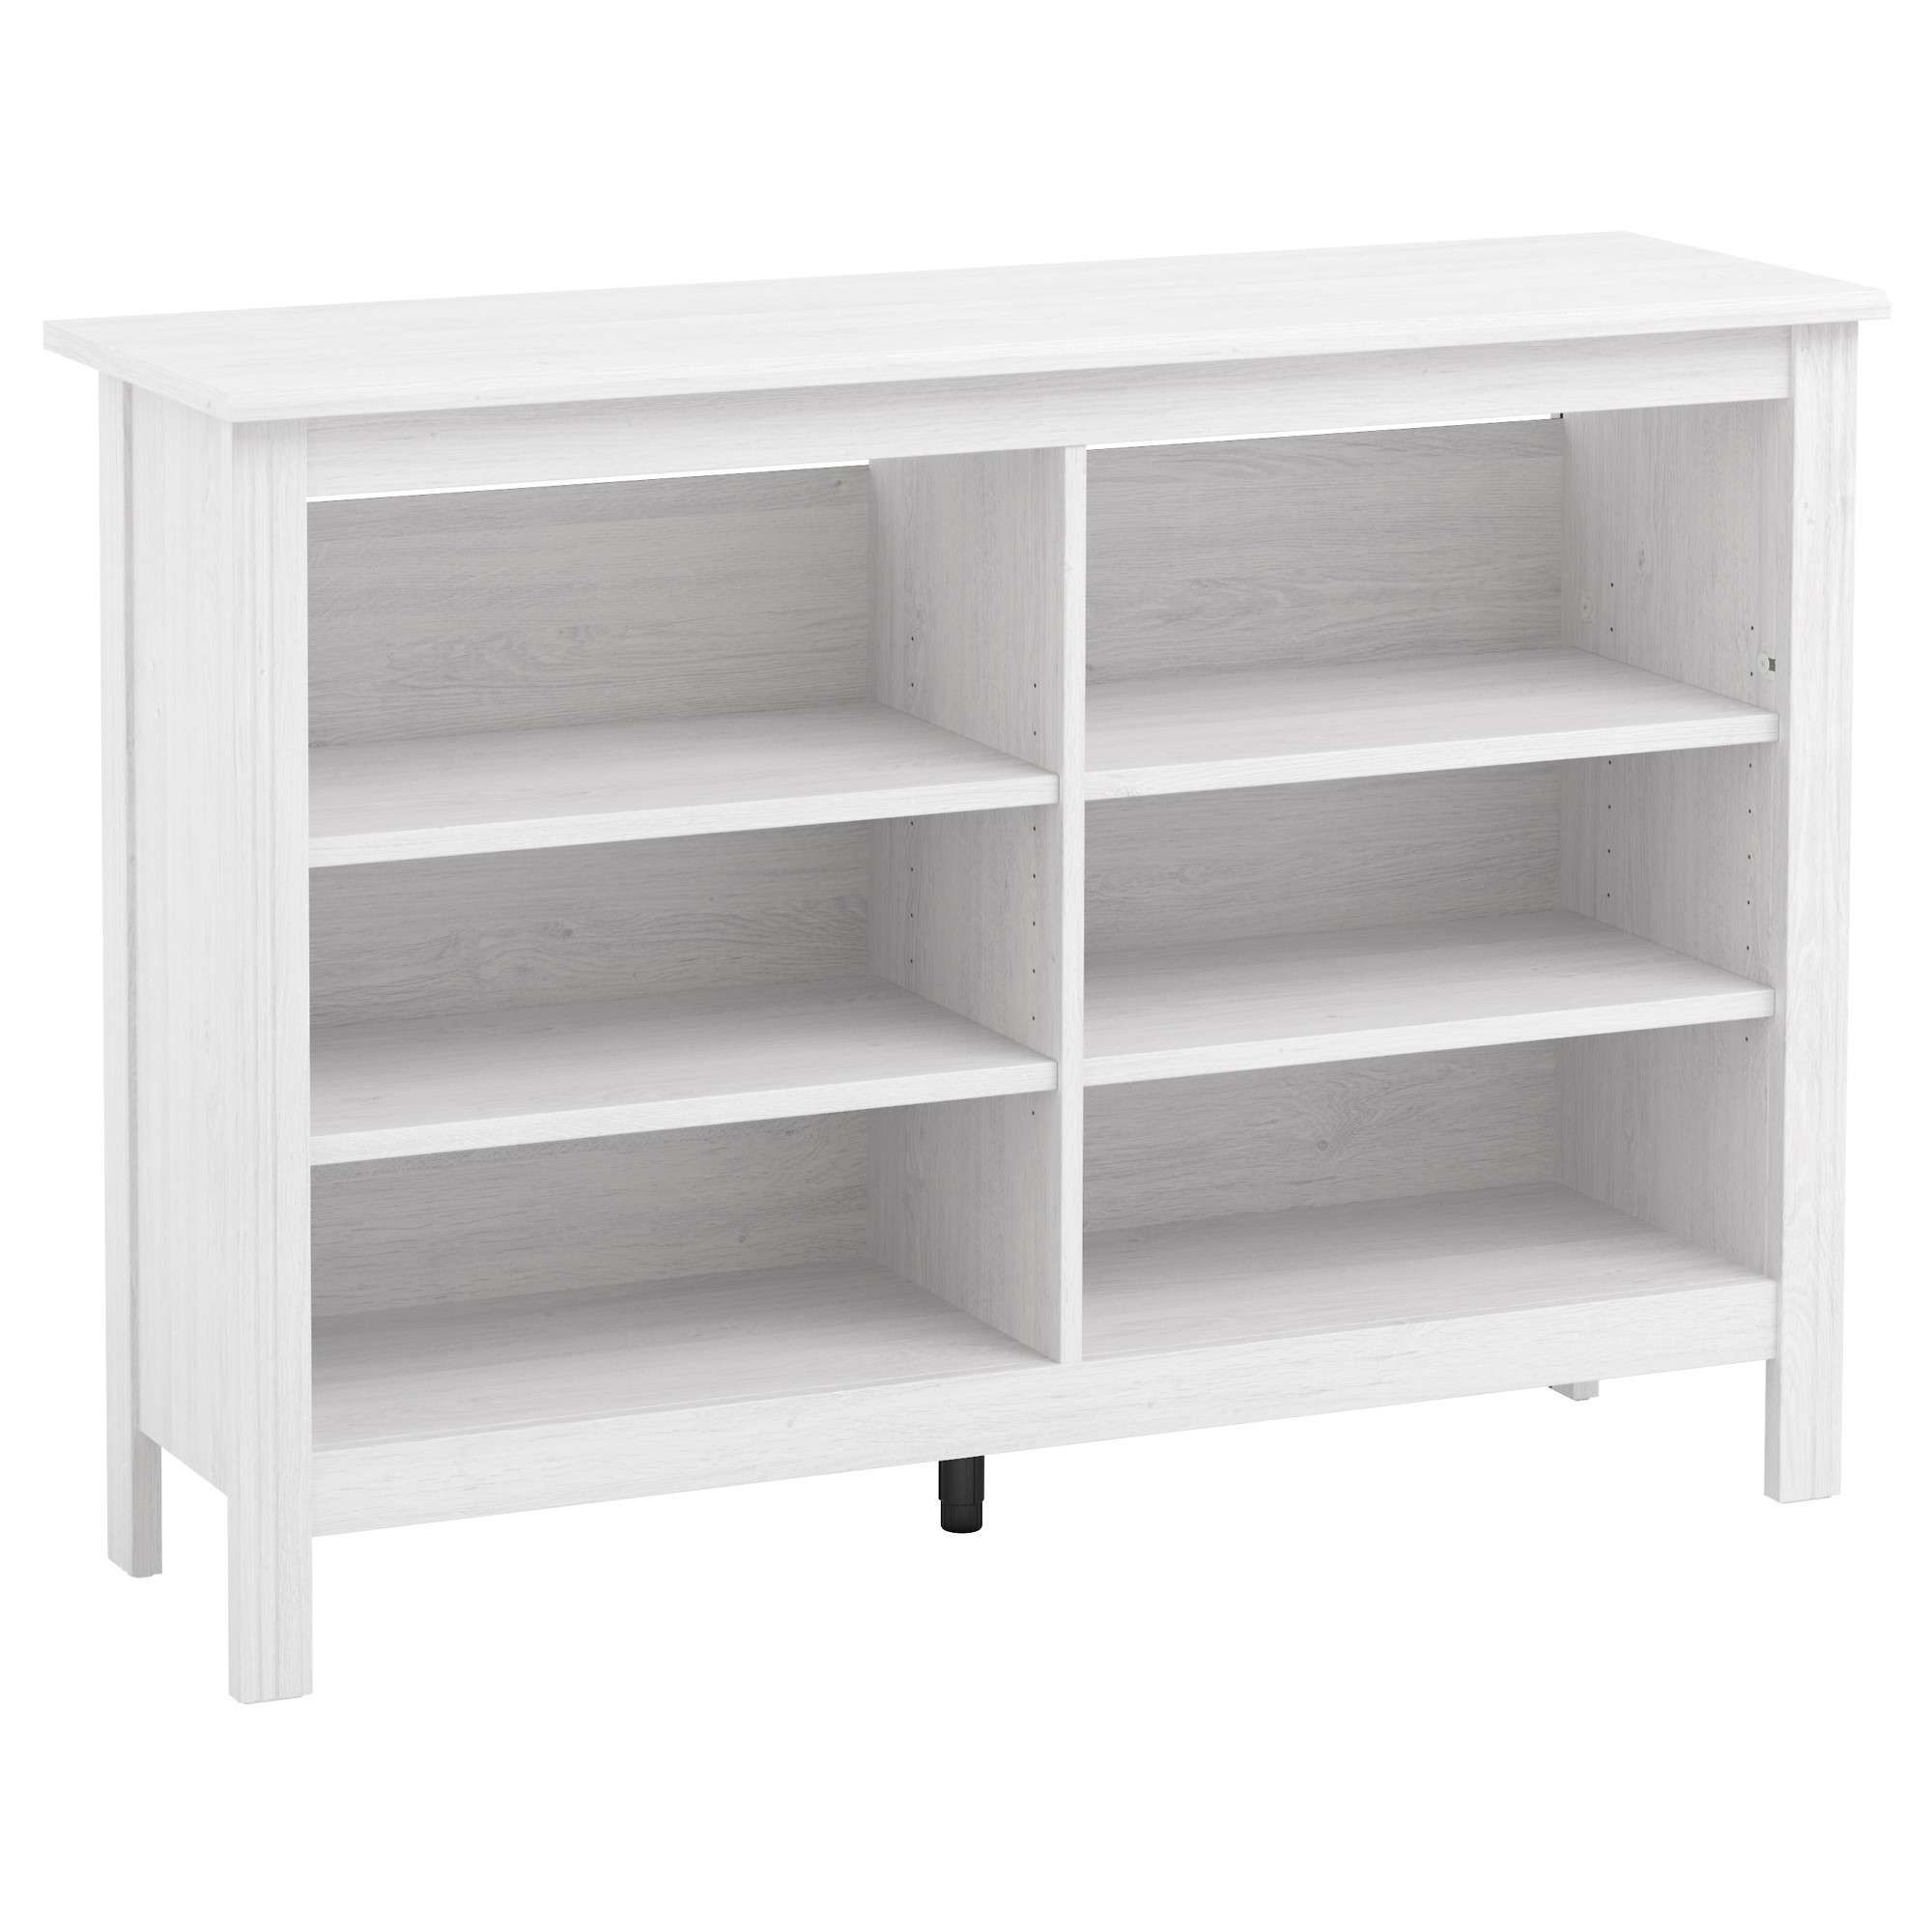 Tv Stands & Tv Units | Ikea In Small White Tv Stands (View 13 of 15)